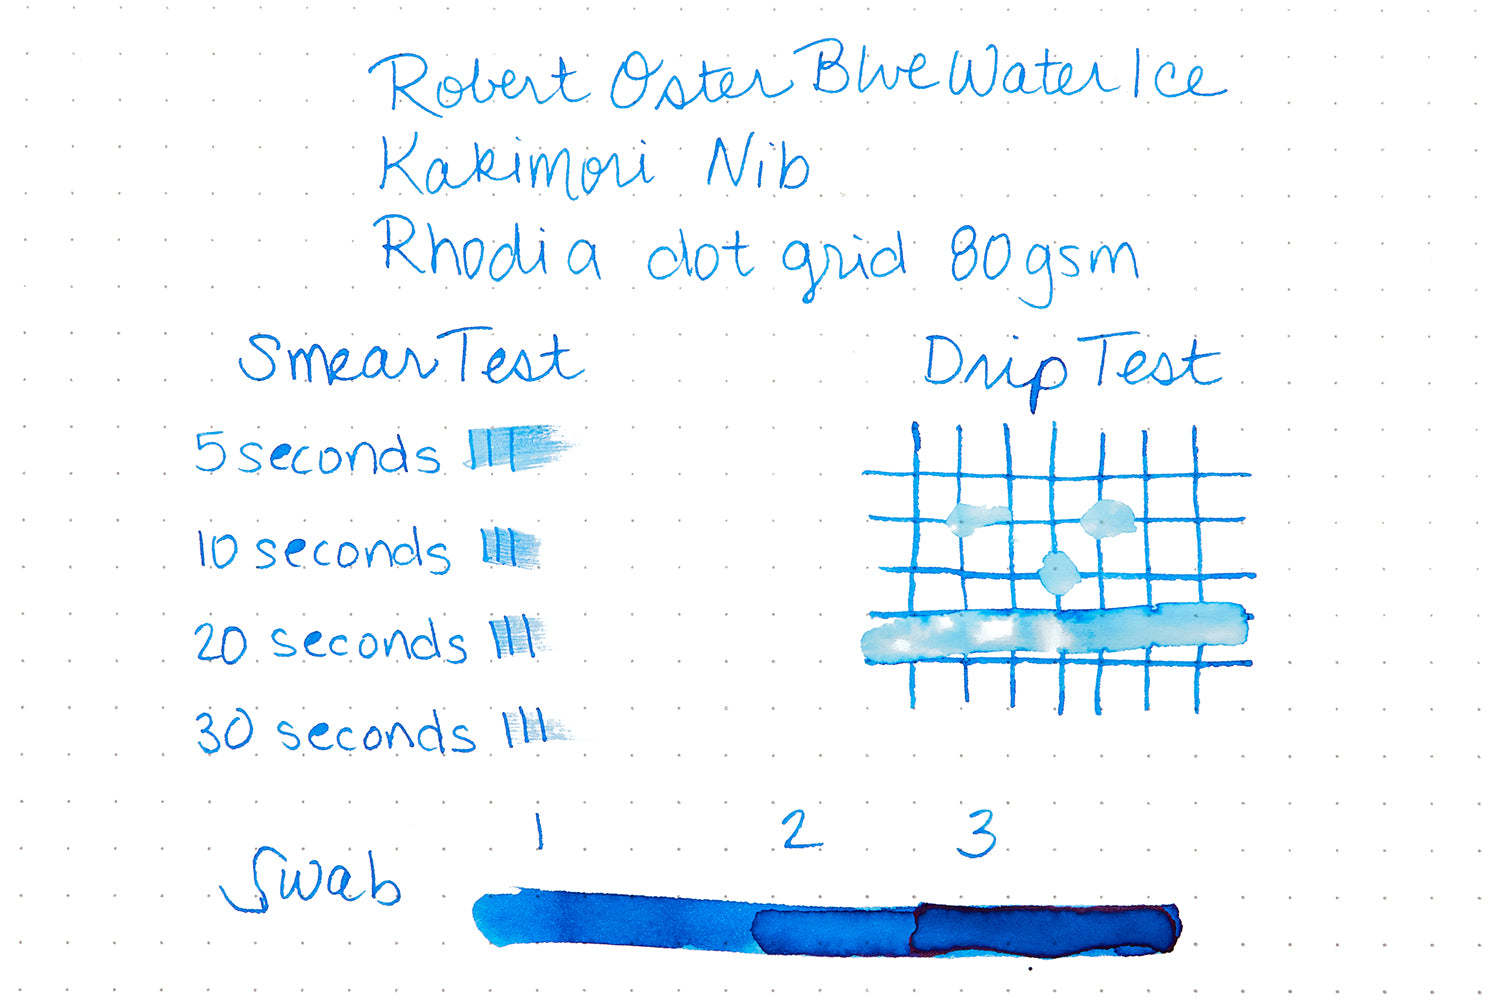 Robert Oster Blue Water Ice Fountain Pen ink writing sample on white dot grid paper